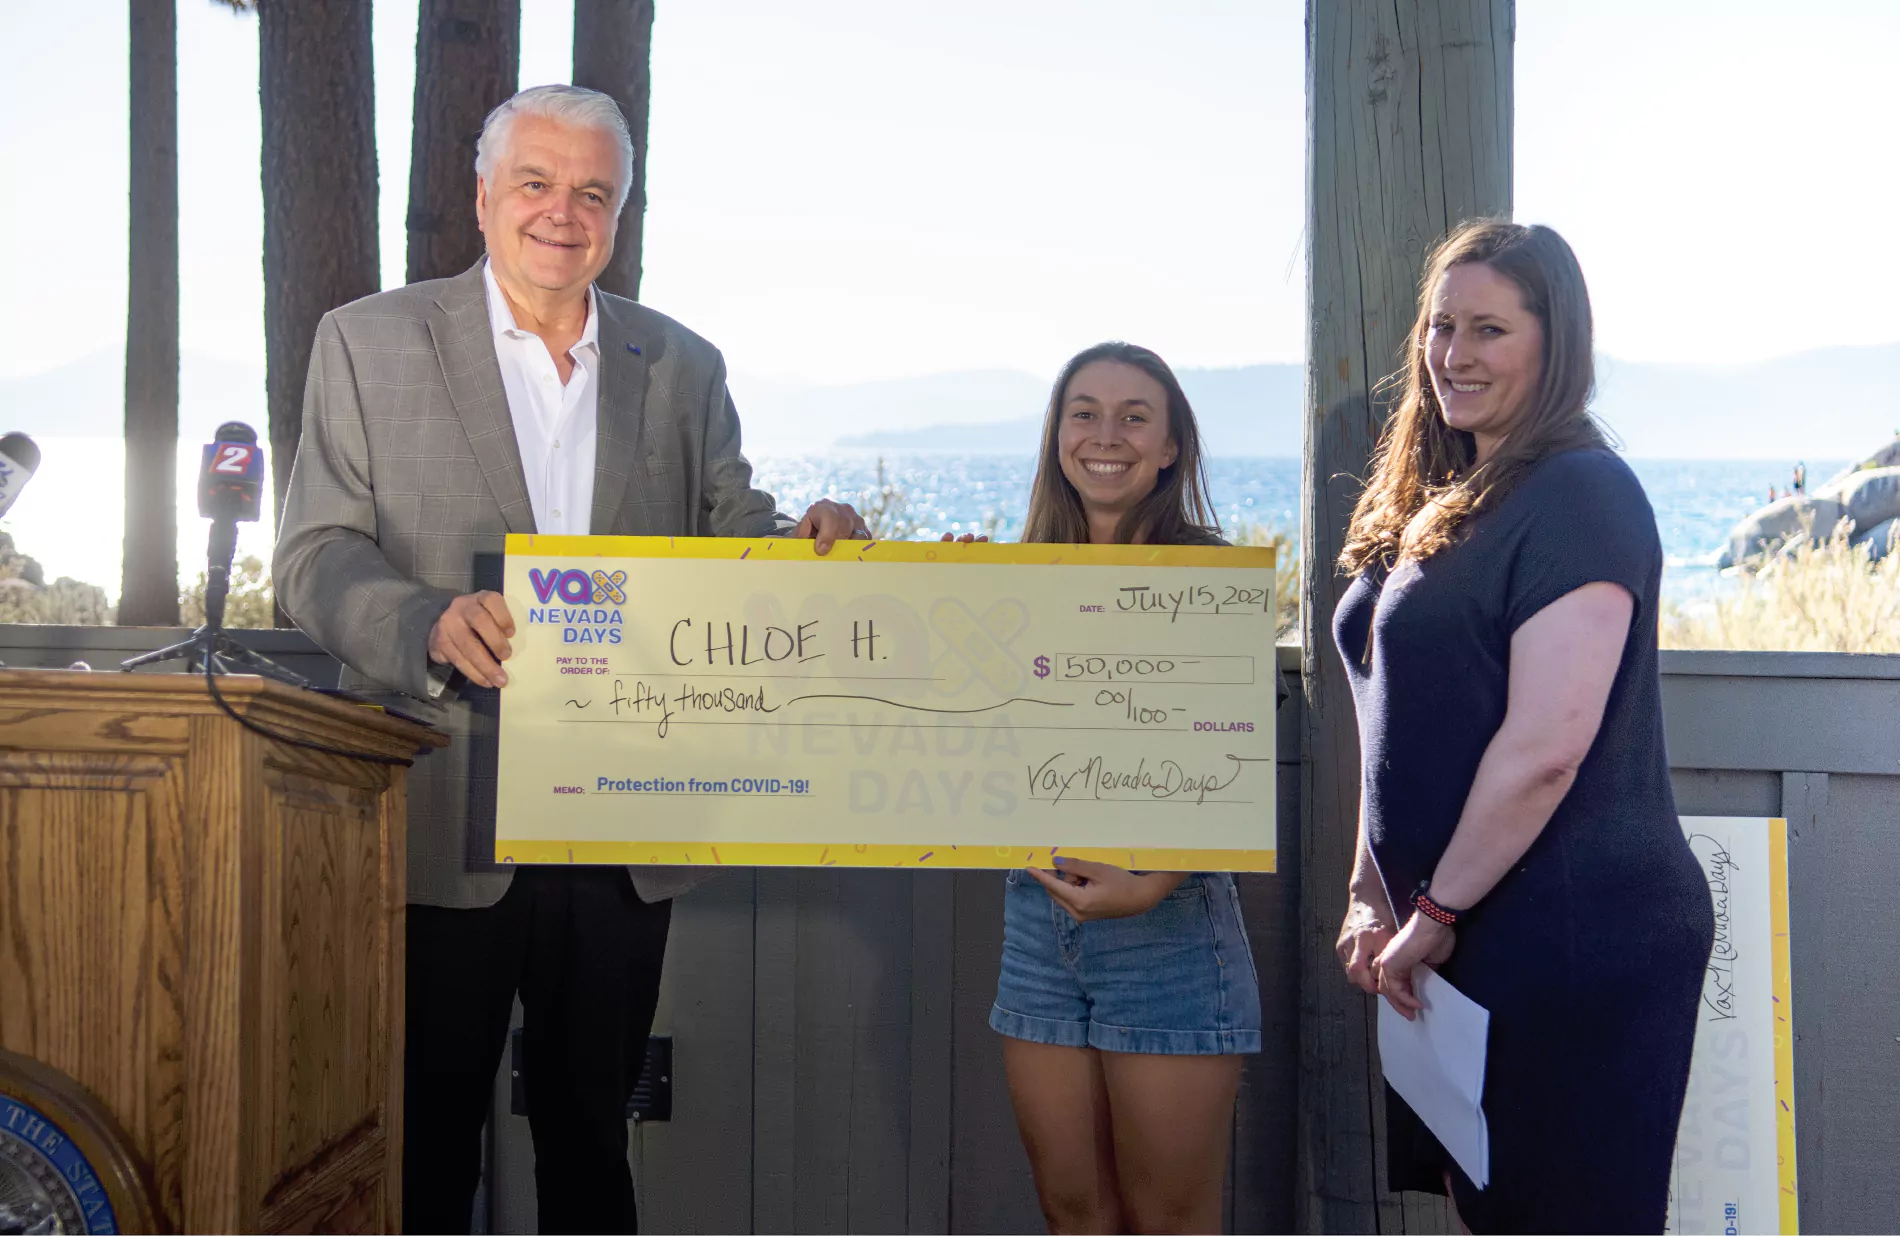 Governor Sisolak presenting Vax Nevada Days winner with check